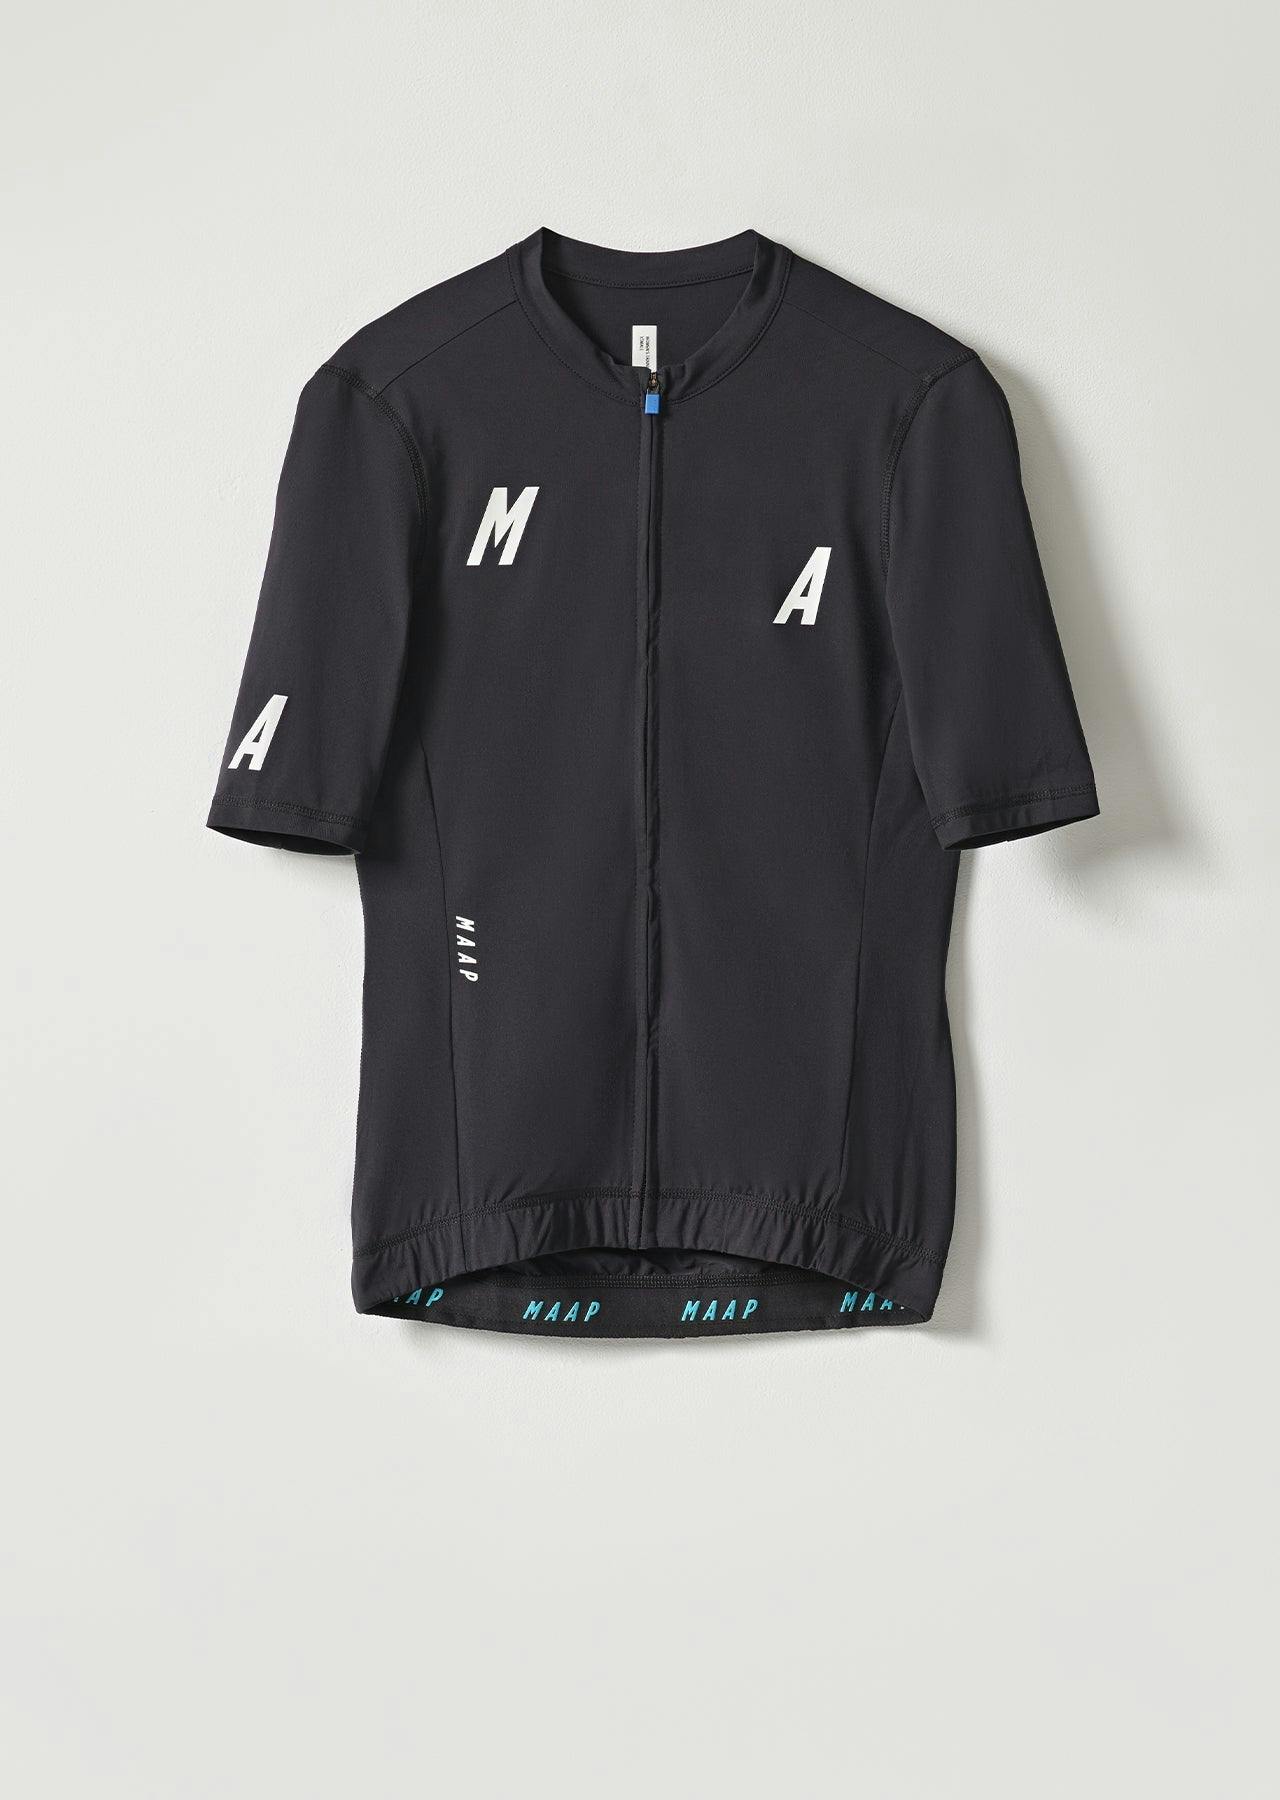 Women’s Cycling Clothing on Sale | Archive | MAAP